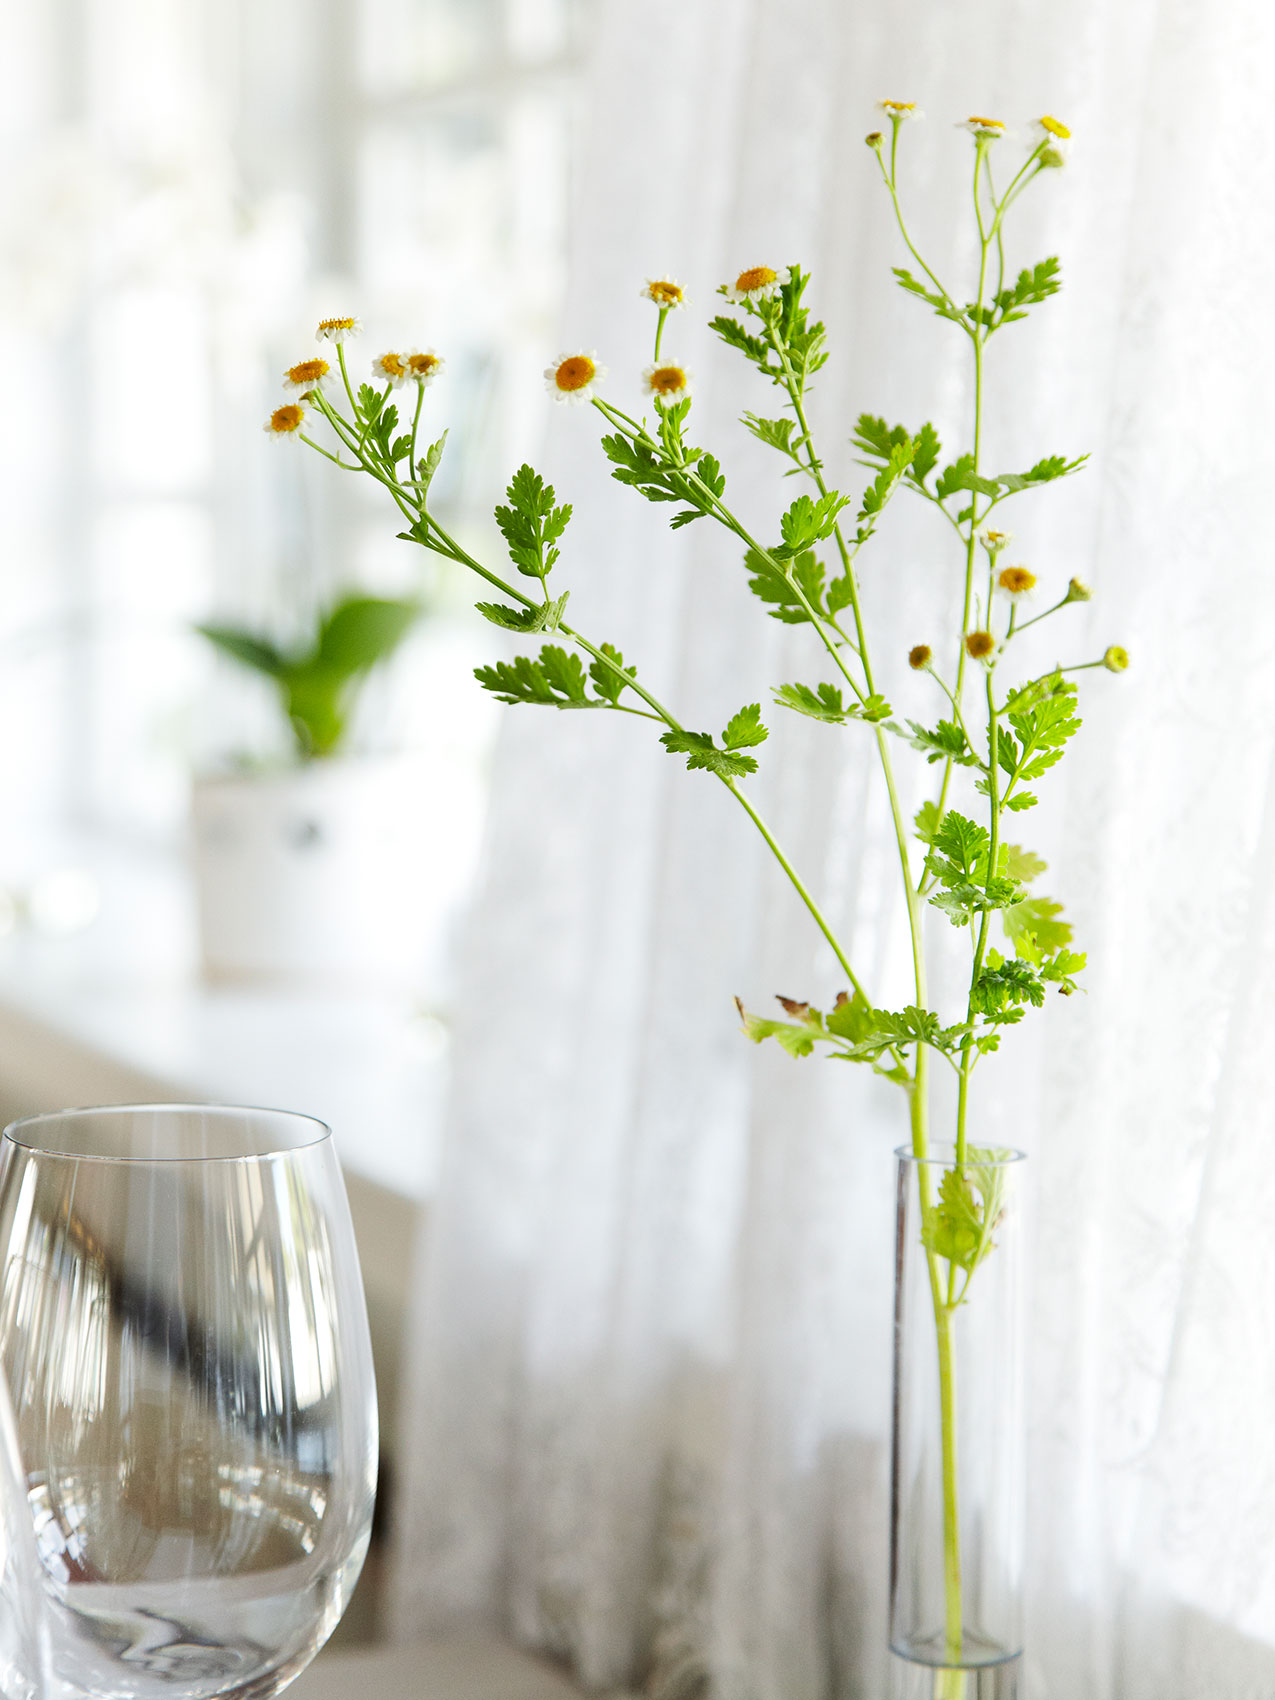 Laesoe Salt • Wild Daisies in Thin Glass Vase at Table • Advertising & Lifestyle Food Photography